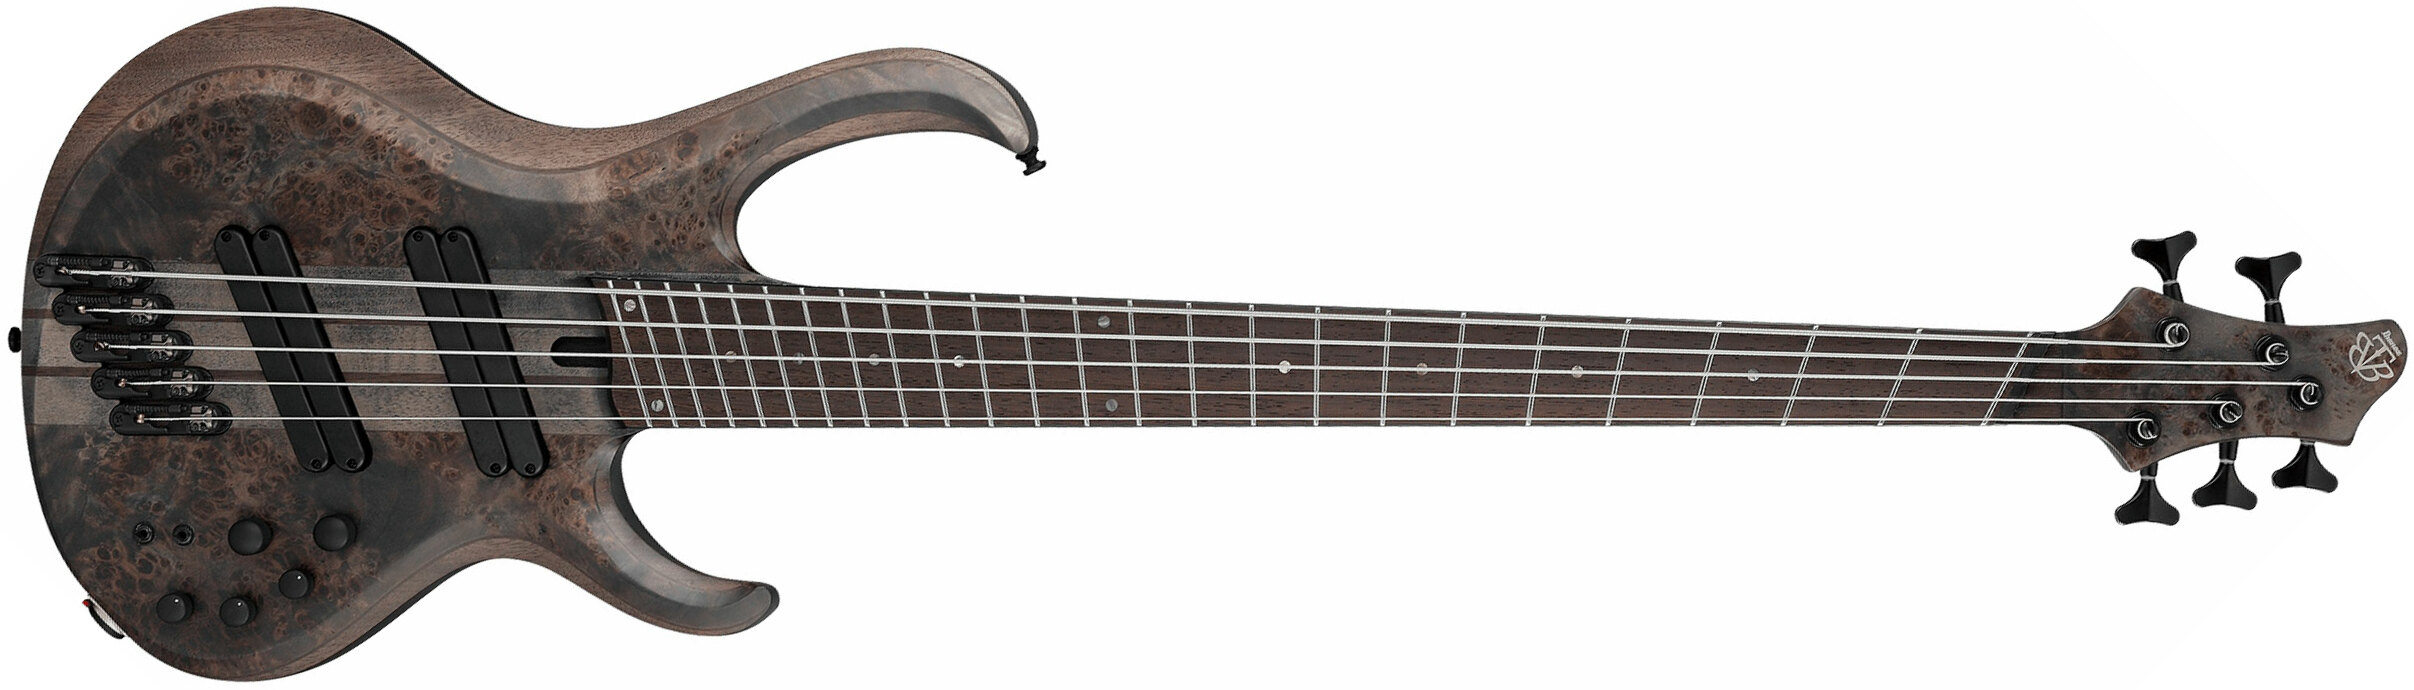 Ibanez Btb805ms Tgf 5c Multiscale Active Pp - Transparent Gray Flat - Solid body electric bass - Main picture